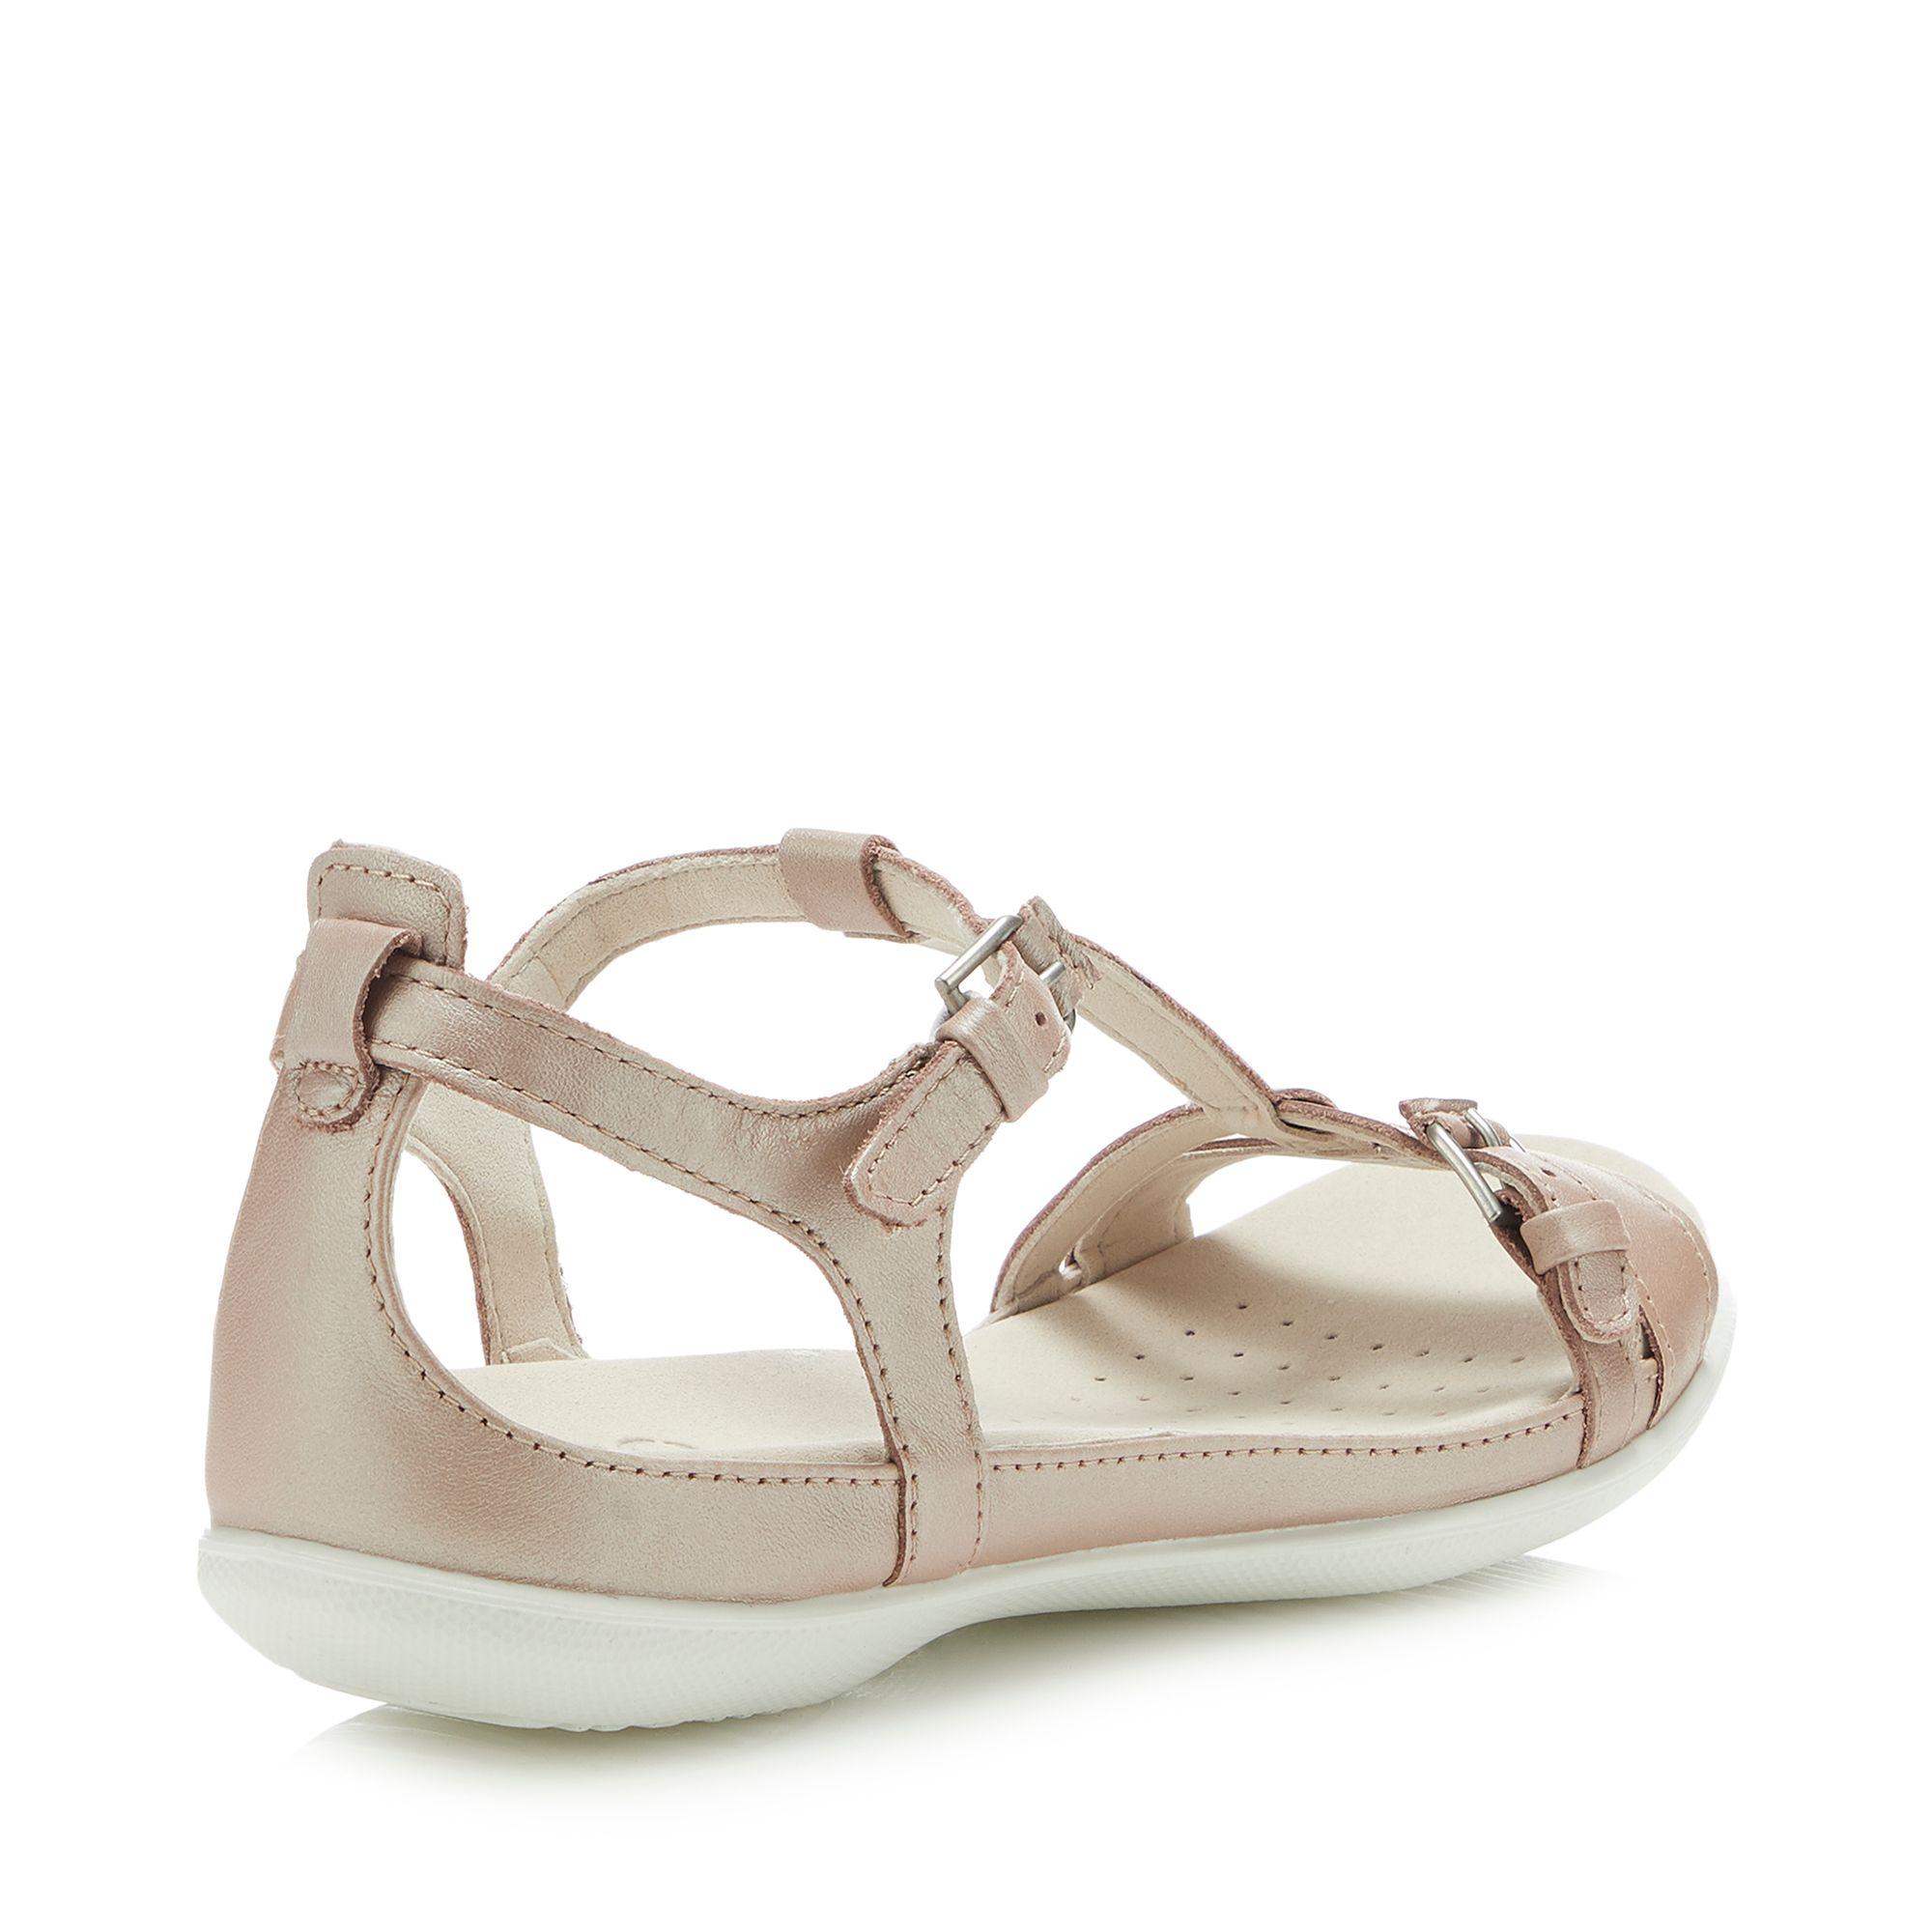 Ecco Leather 'flash 923' Sandals in Light Gold (Metallic) - Lyst